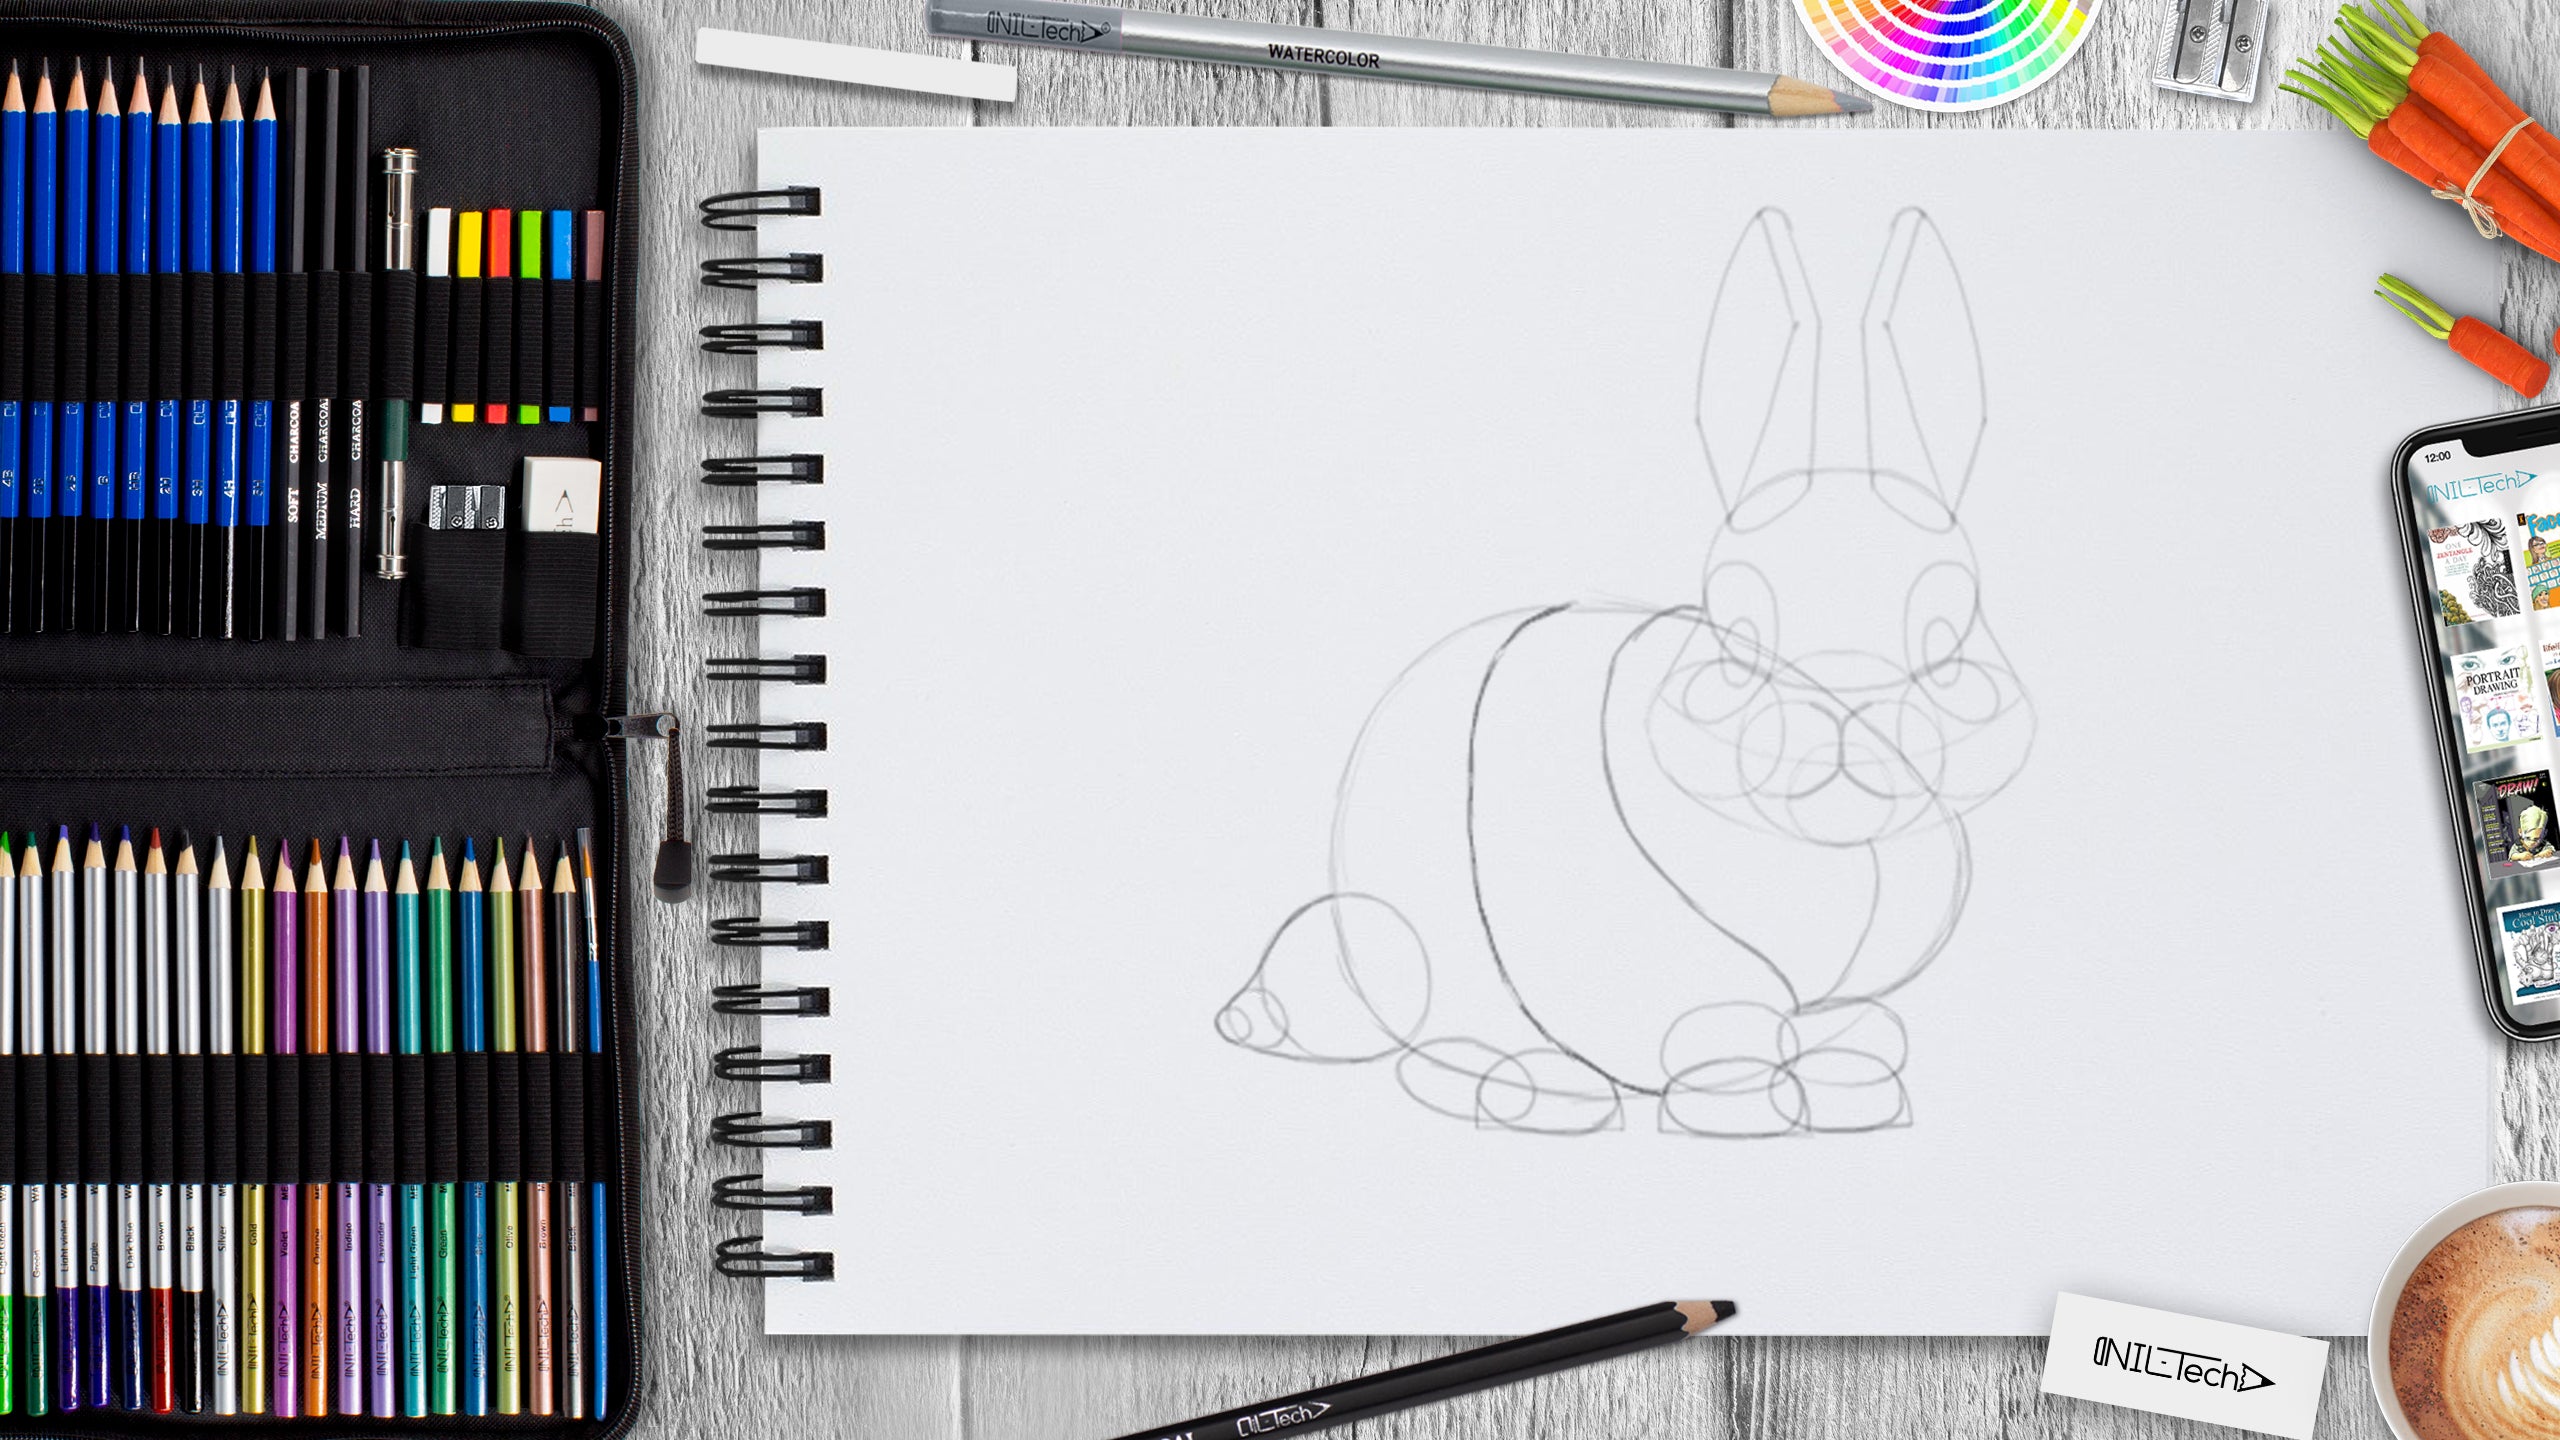 Cute Simple Rabbit Drawing Colouring Book Stock Vector (Royalty Free)  2300578087 | Shutterstock